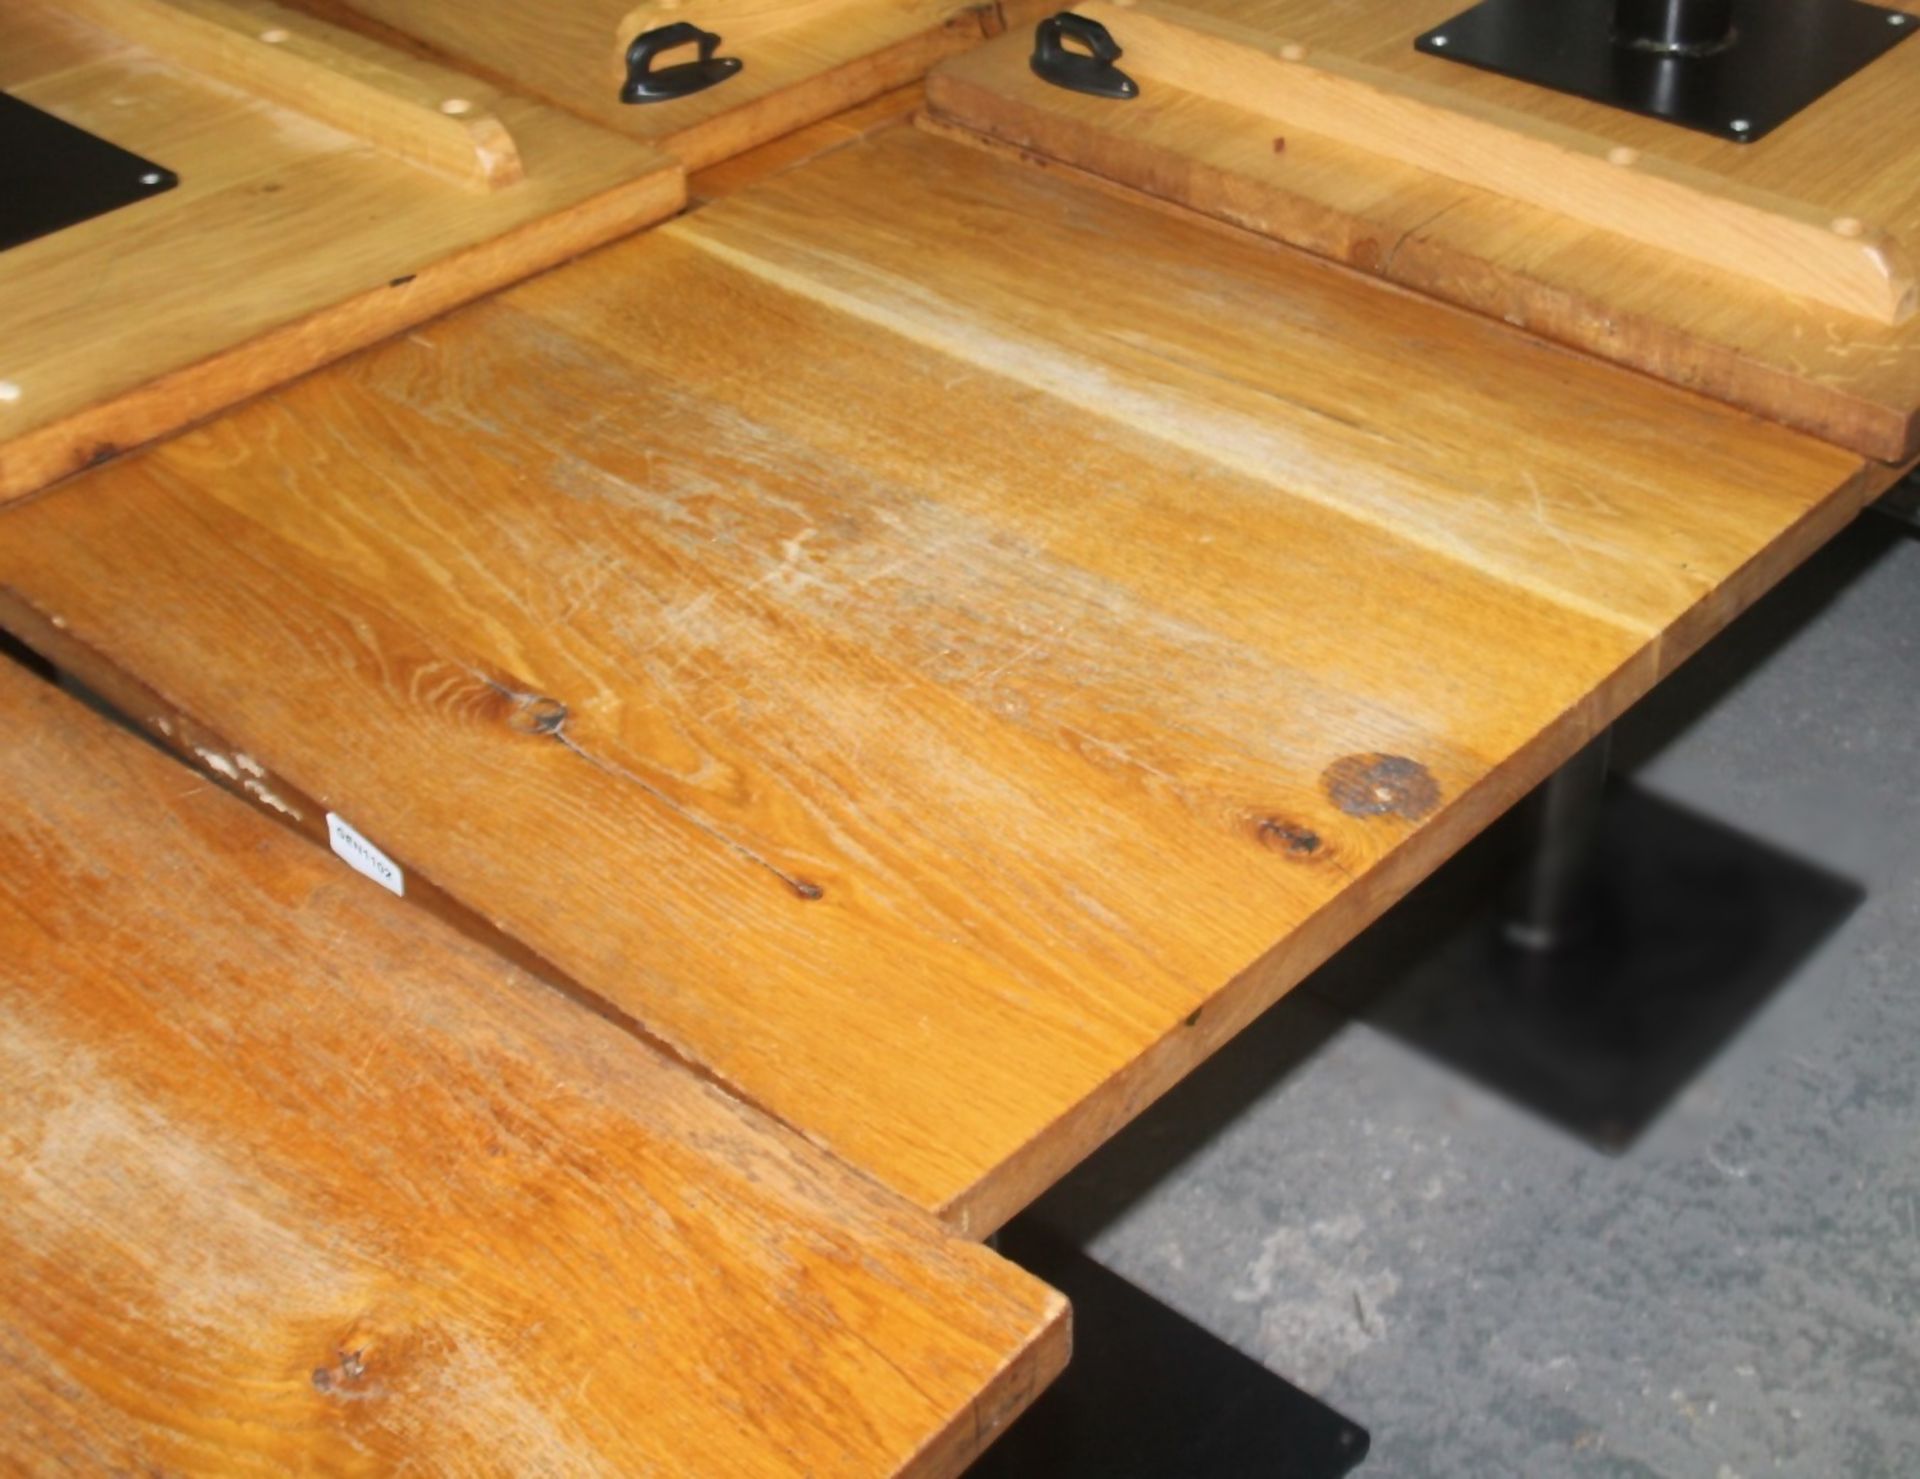 4 x Solid Oak Restaurant Dining Tables - Natural Rustic Knotty Oak Tops With Black Cast Iron Legs - Image 3 of 4